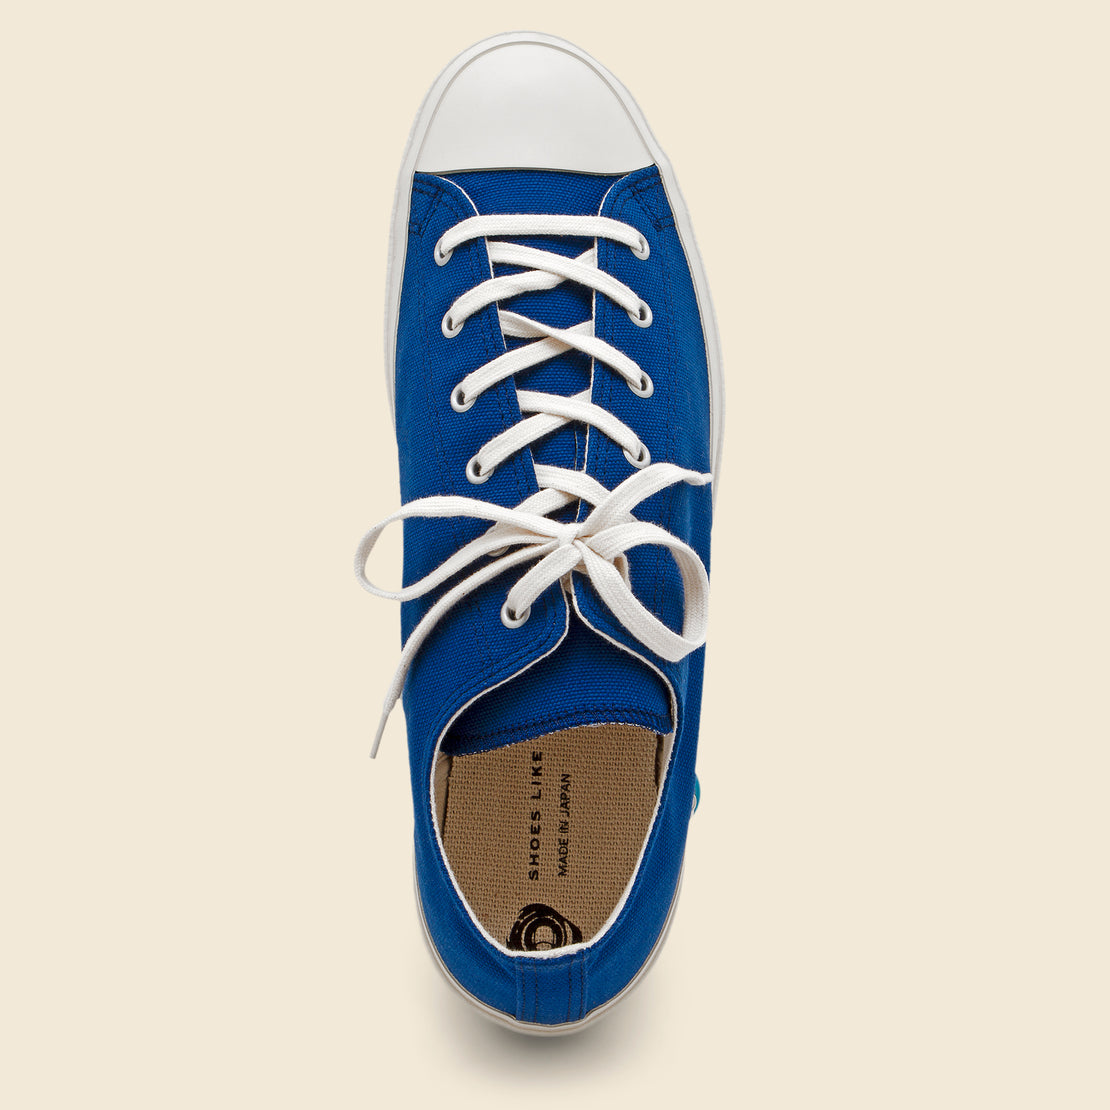 01-JP Lo Sneaker - Indigo - Shoes Like Pottery - STAG Provisions - Shoes - Athletic